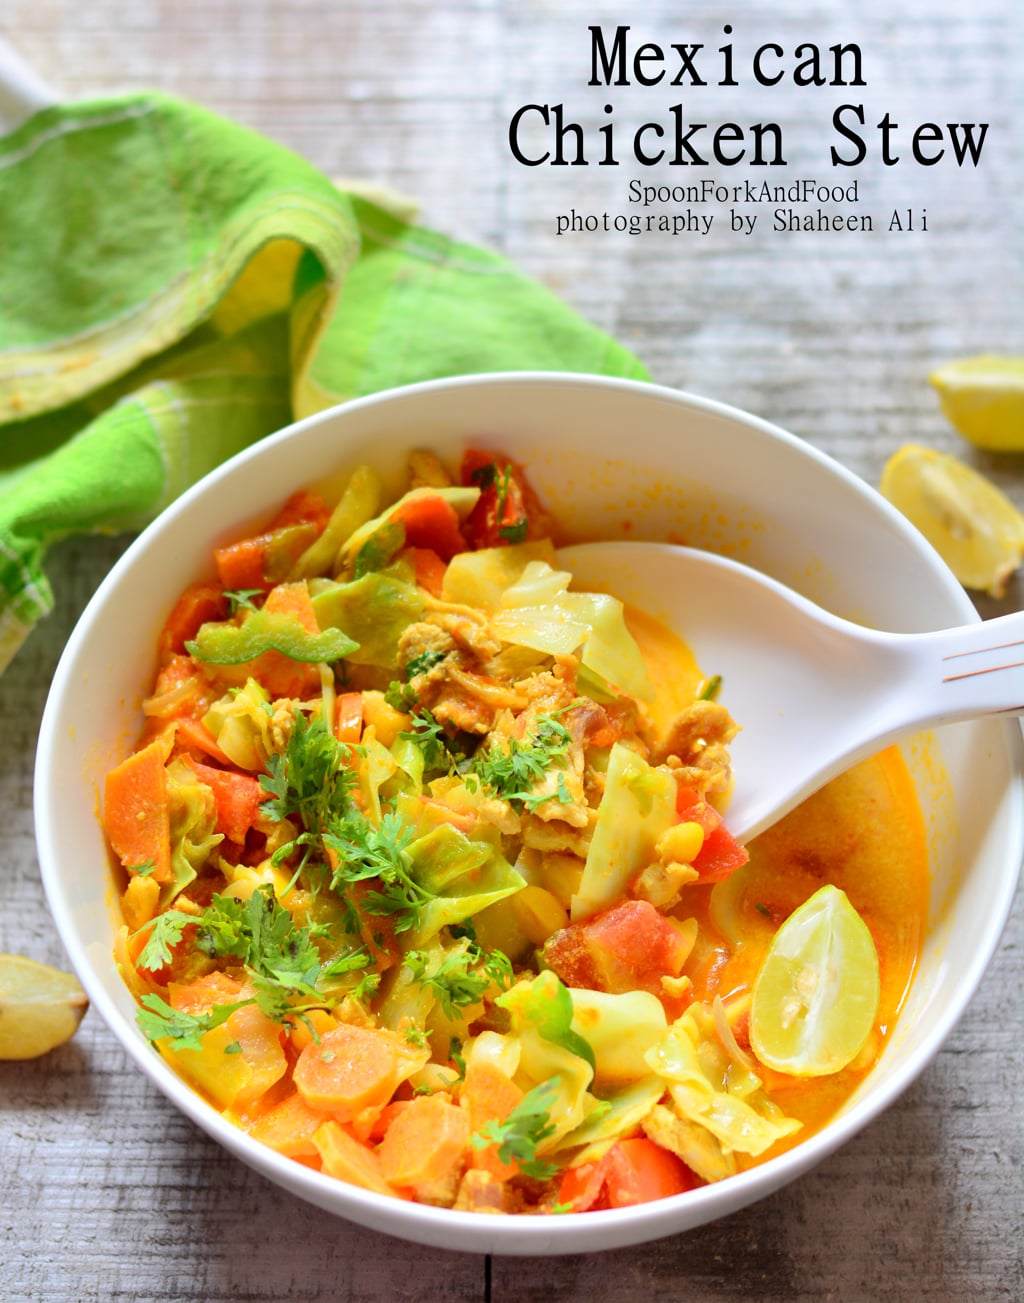 Best Mexican Stew Chicken – Easy Recipes To Make at Home